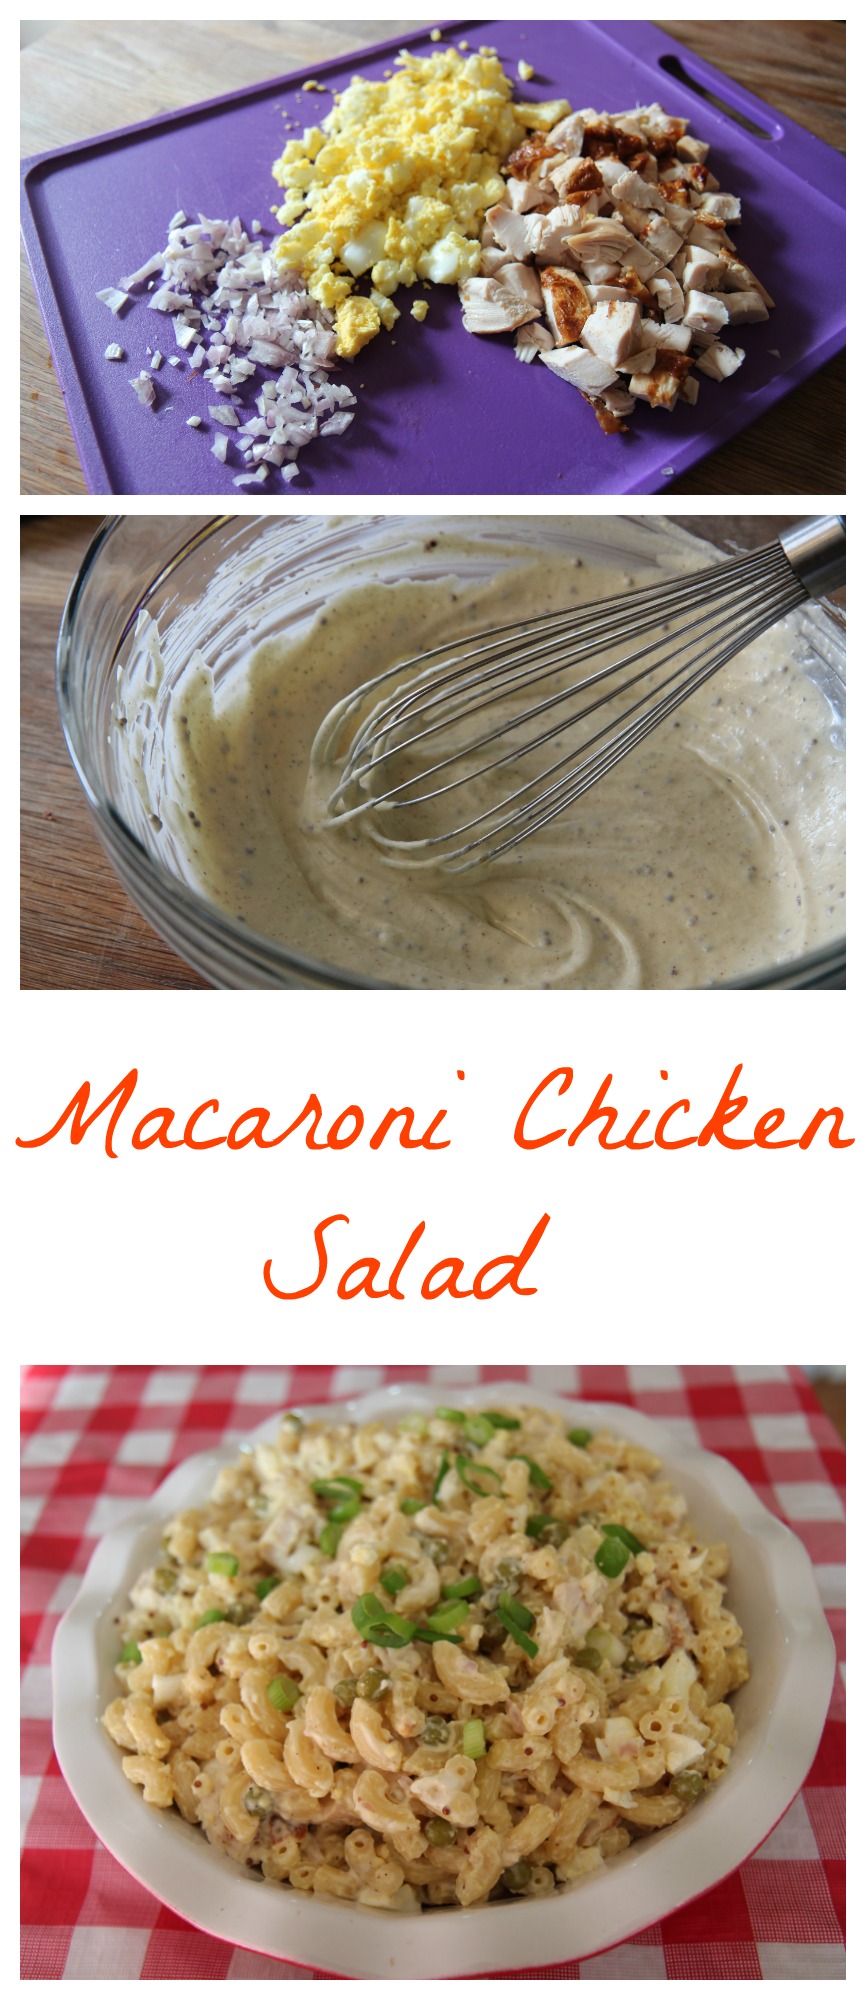 Creamy Macaroni Chicken Salad from Cookedbyjulie.com